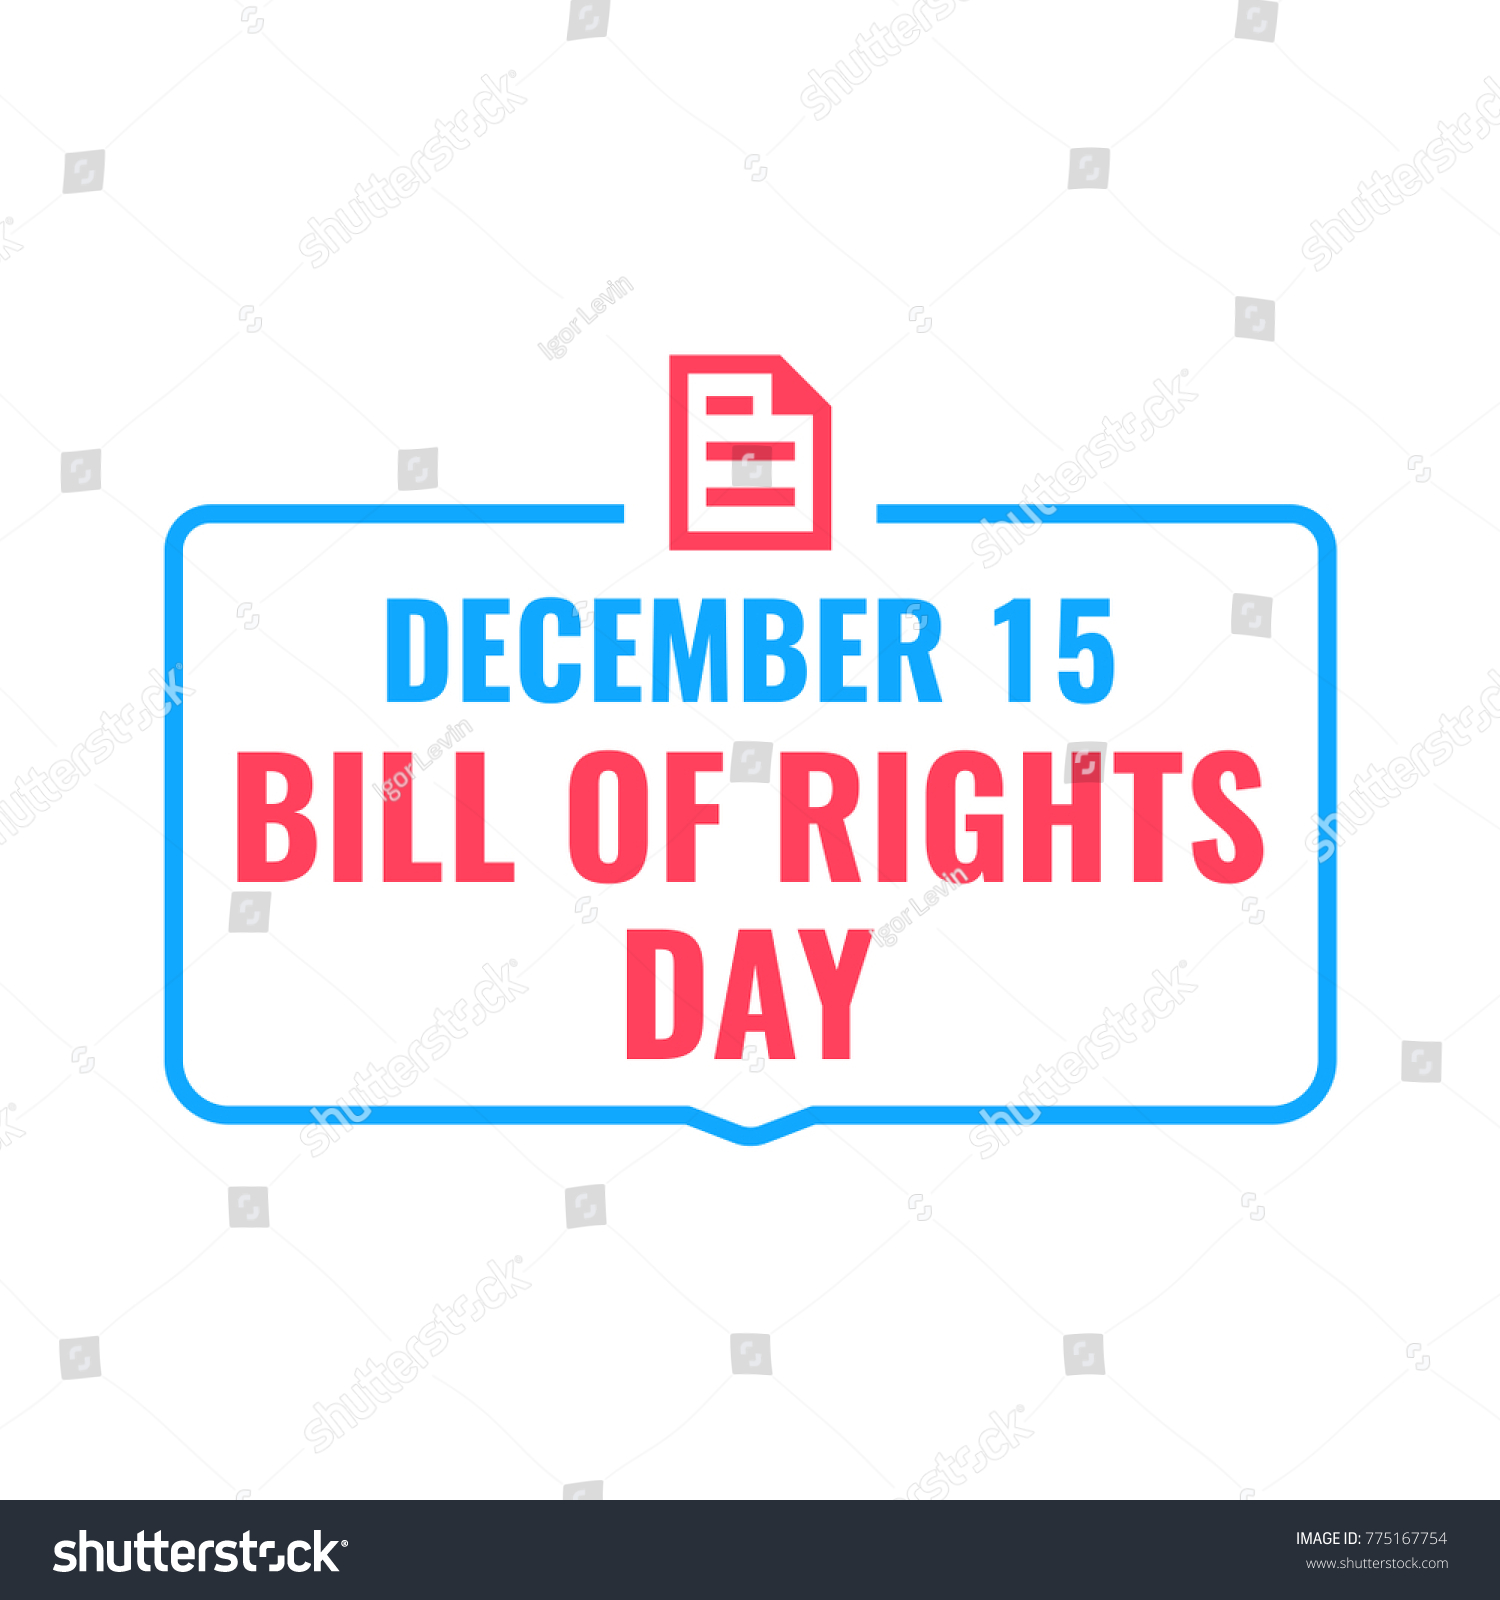 SVG of Bill of rights day. Vector icon, badge illustration on white background. svg